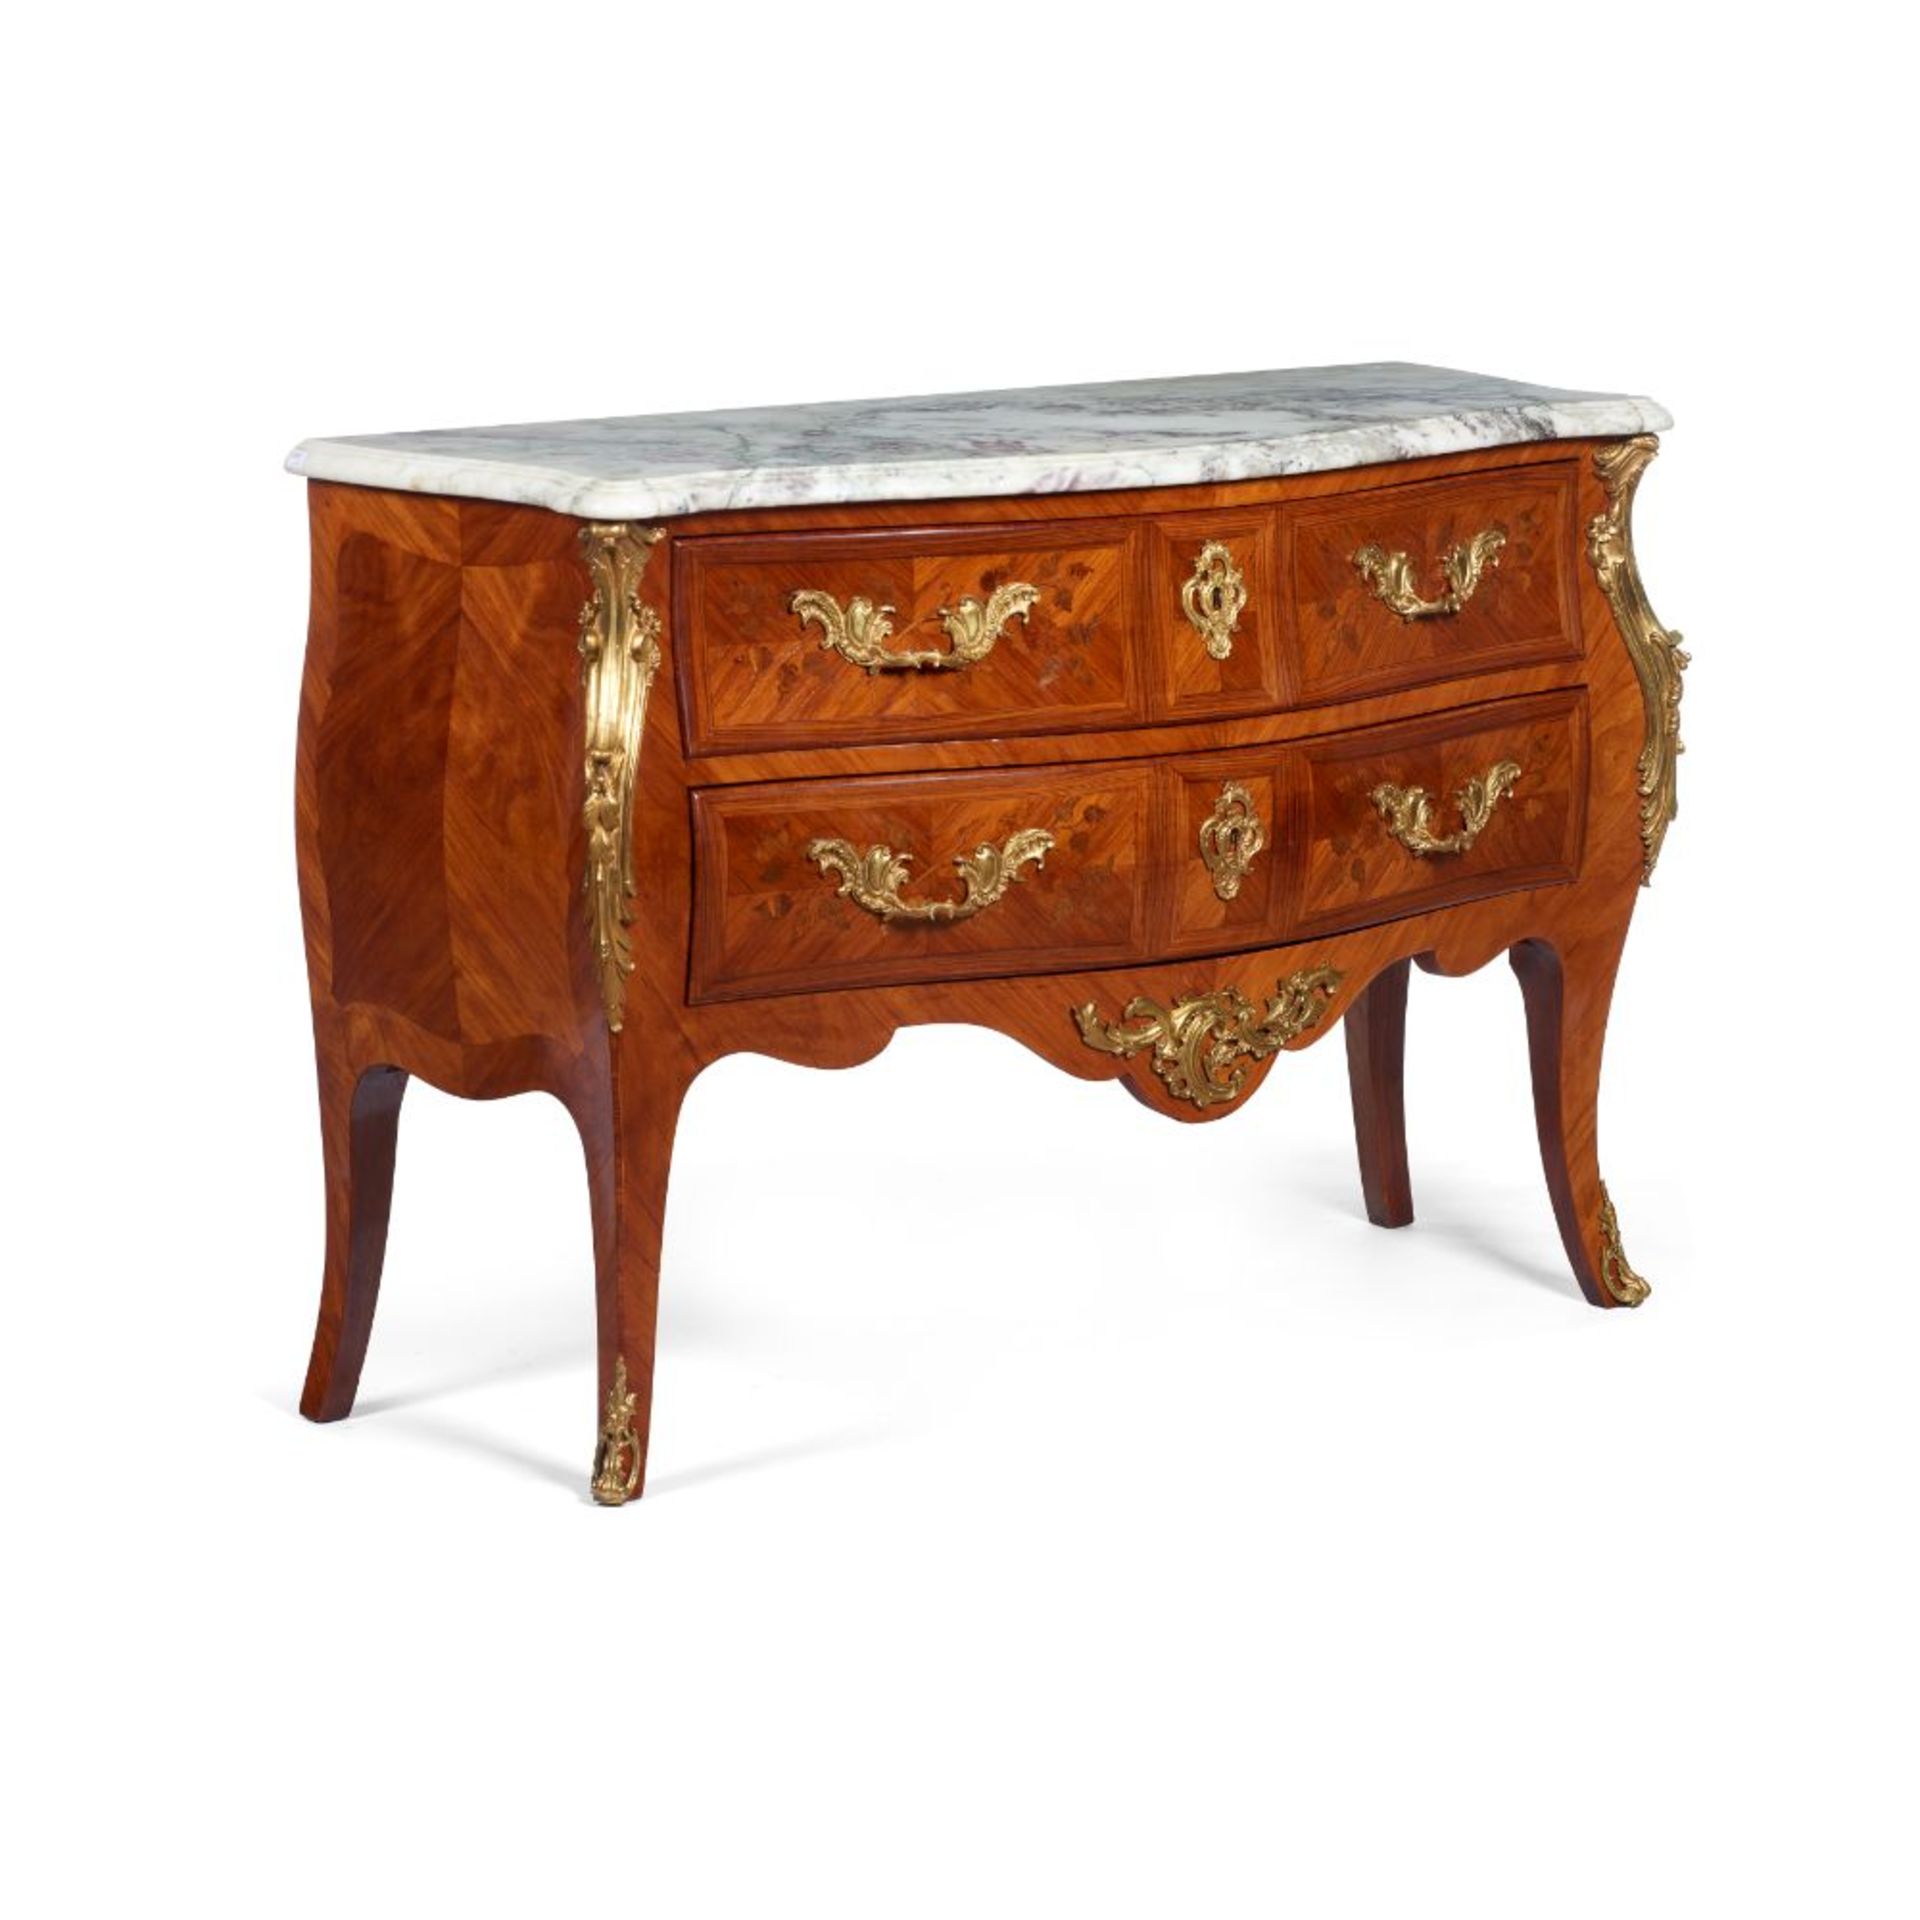 A Louis XV style commode, Jacaranda and satinwood veneered wood carcass, Various woods marquetry